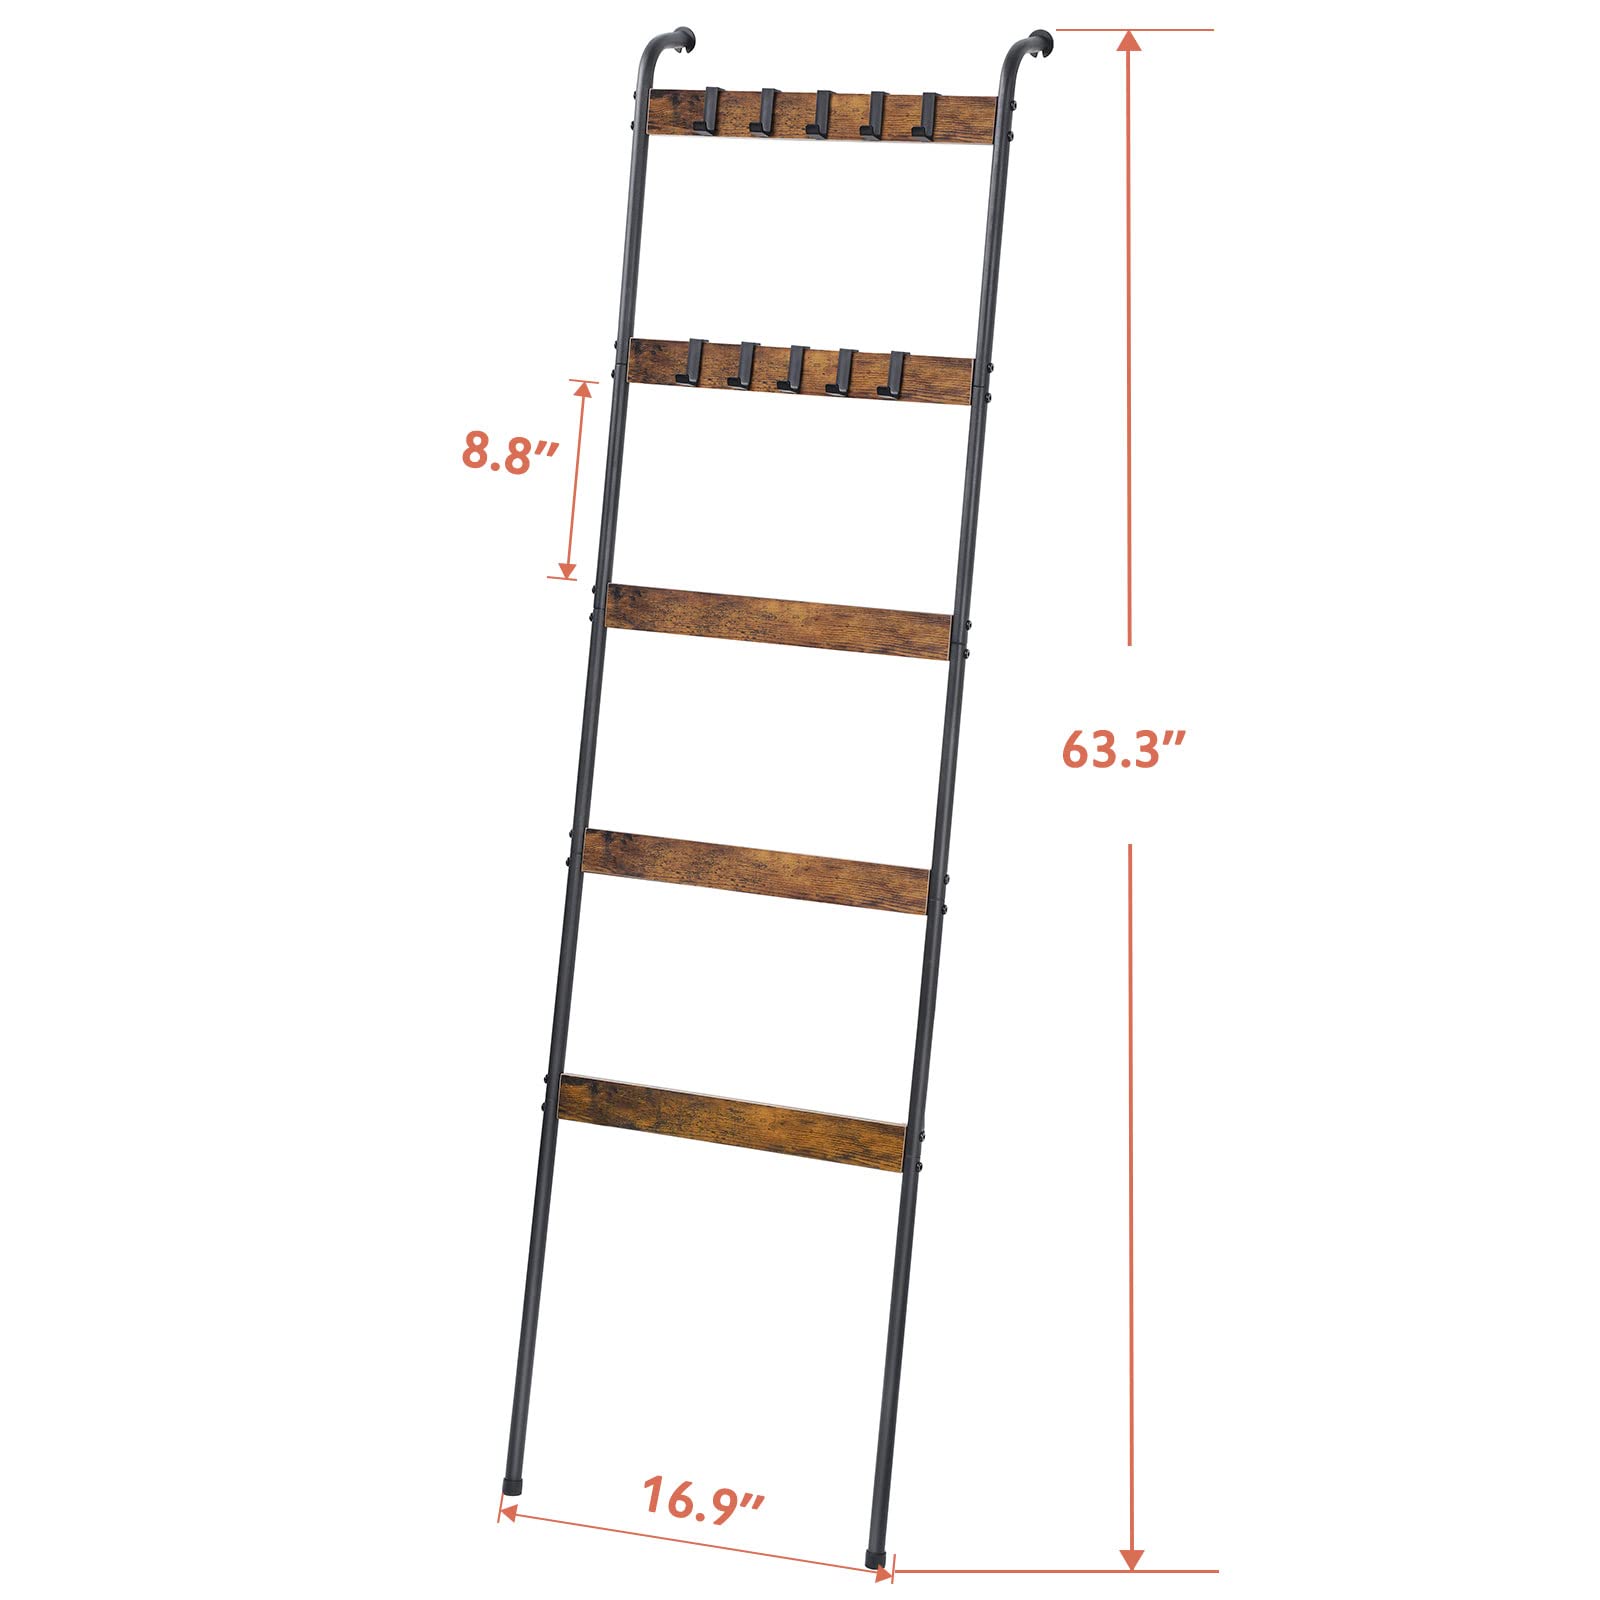 Ousheng Blanket Ladder, 5 Tier Blanket Holder with 10 Removable Hooks, Farmhouse Style Blanket Ladder for Living Room Bathroom, Decorative Wall Mounted Wooden Quilt Standing Towel Drying Storage Rack